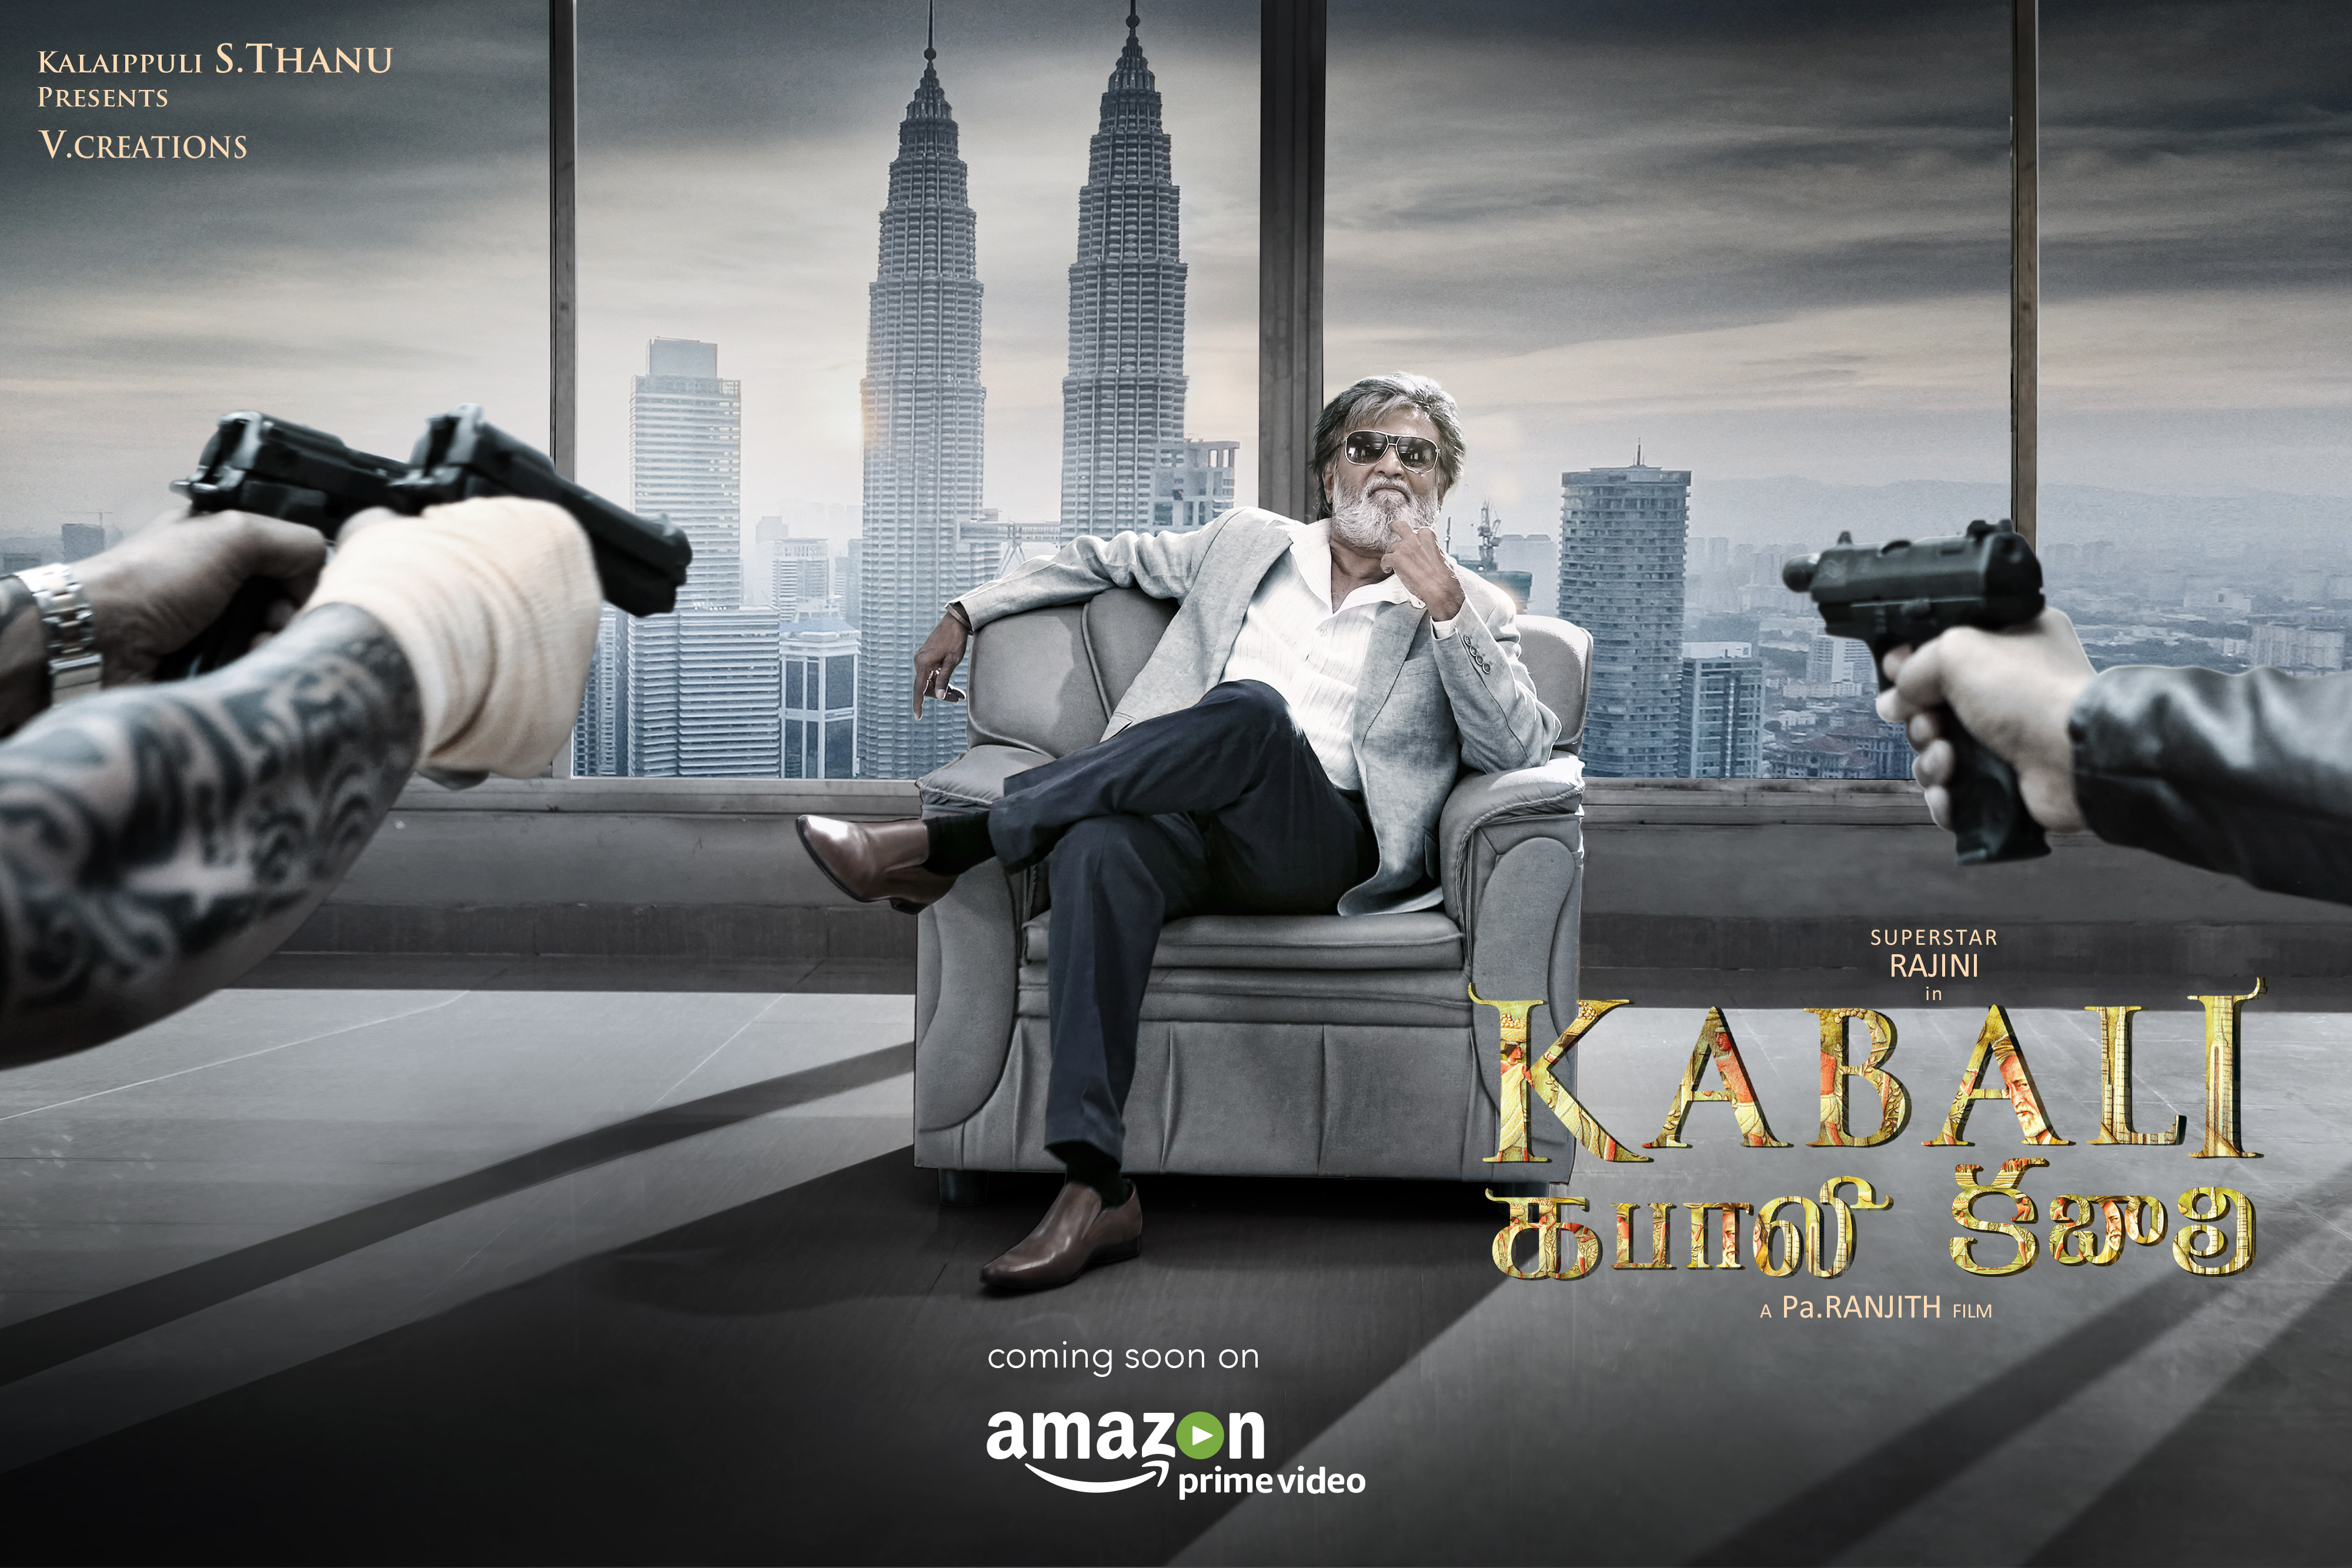 You are currently viewing Amazon Prime Video to exclusively stream Kollywood’s biggest blockbusters – Megastar Rajinikanth’s ‘Kabali’ & Superstar Vijay’s ‘Theri’